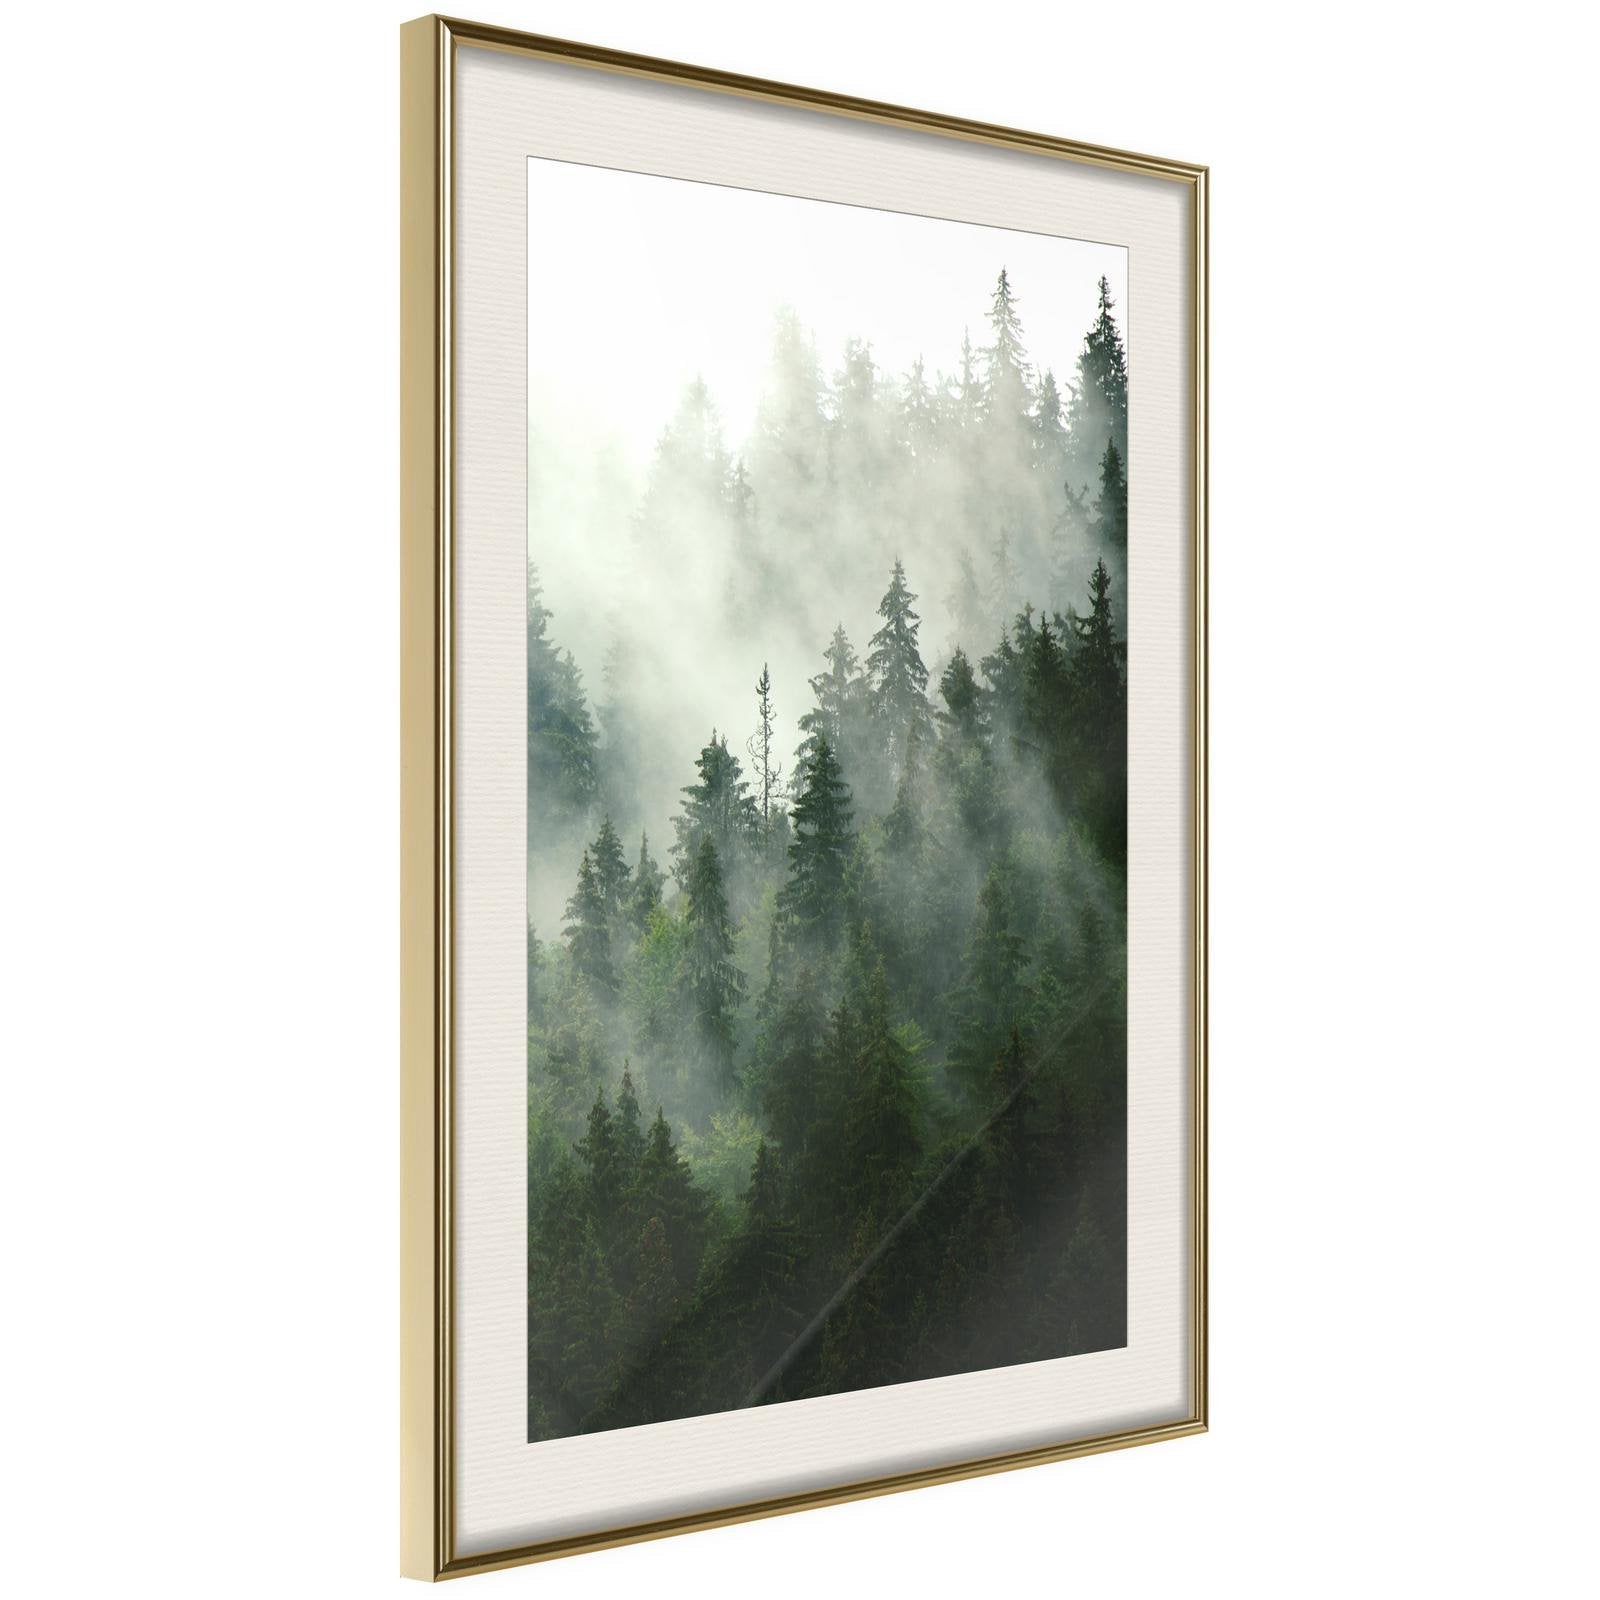 Inramad Poster / Tavla - Steaming Forest-Poster Inramad-Artgeist-20x30-Guldram med passepartout-peaceofhome.se